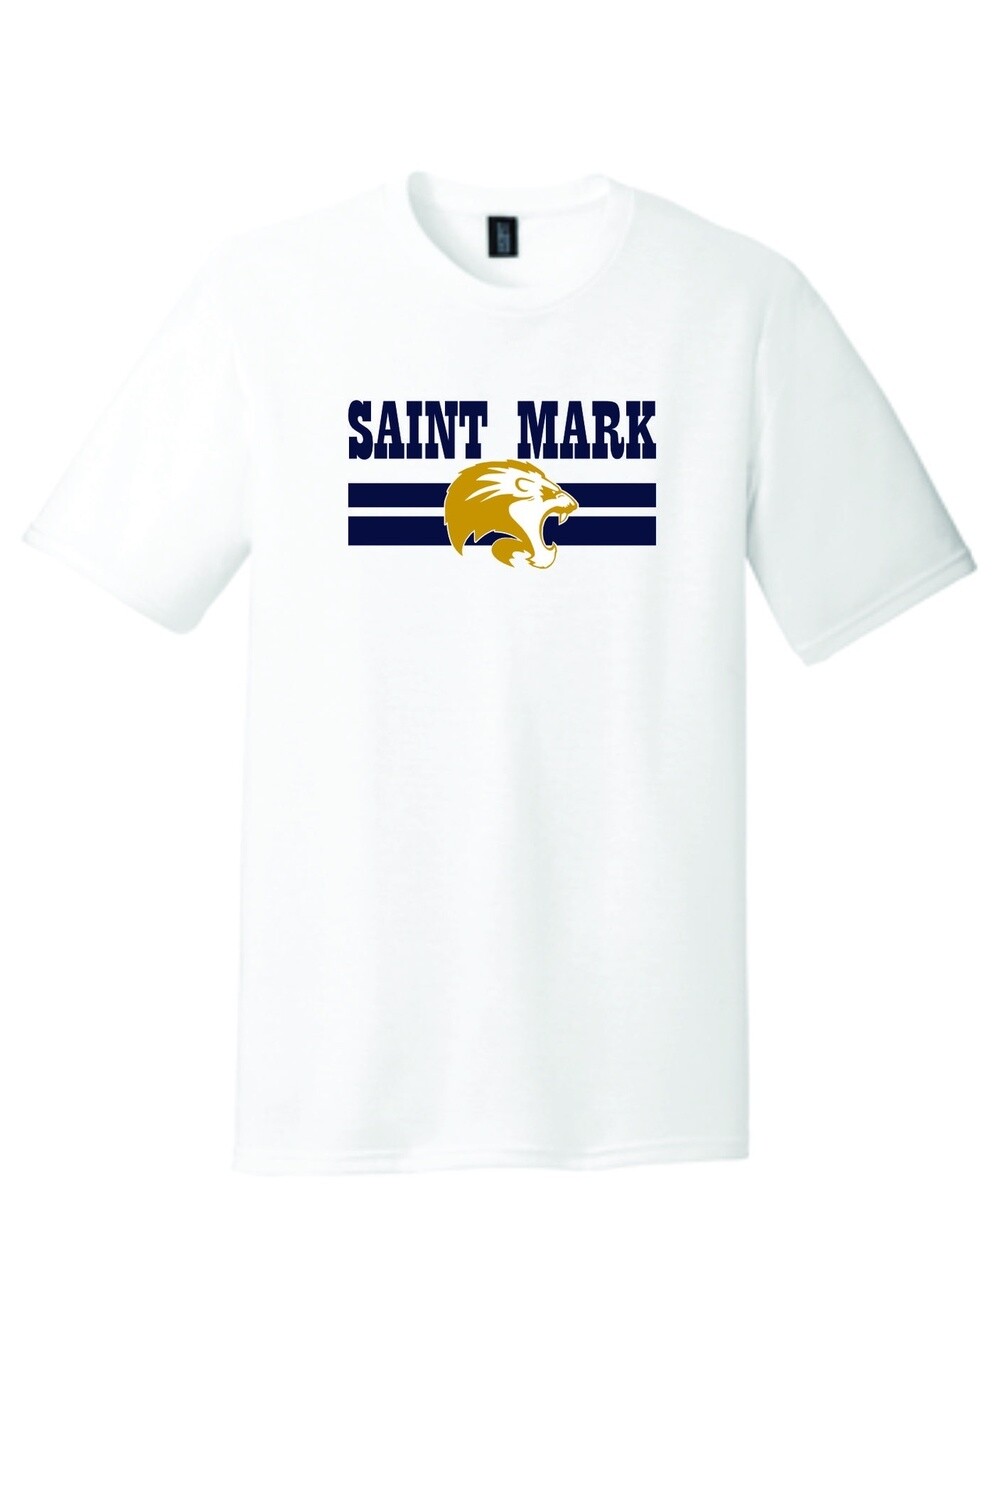 St. Mark Adult Tee, Size: XS-DM130, Colour: White Triblend